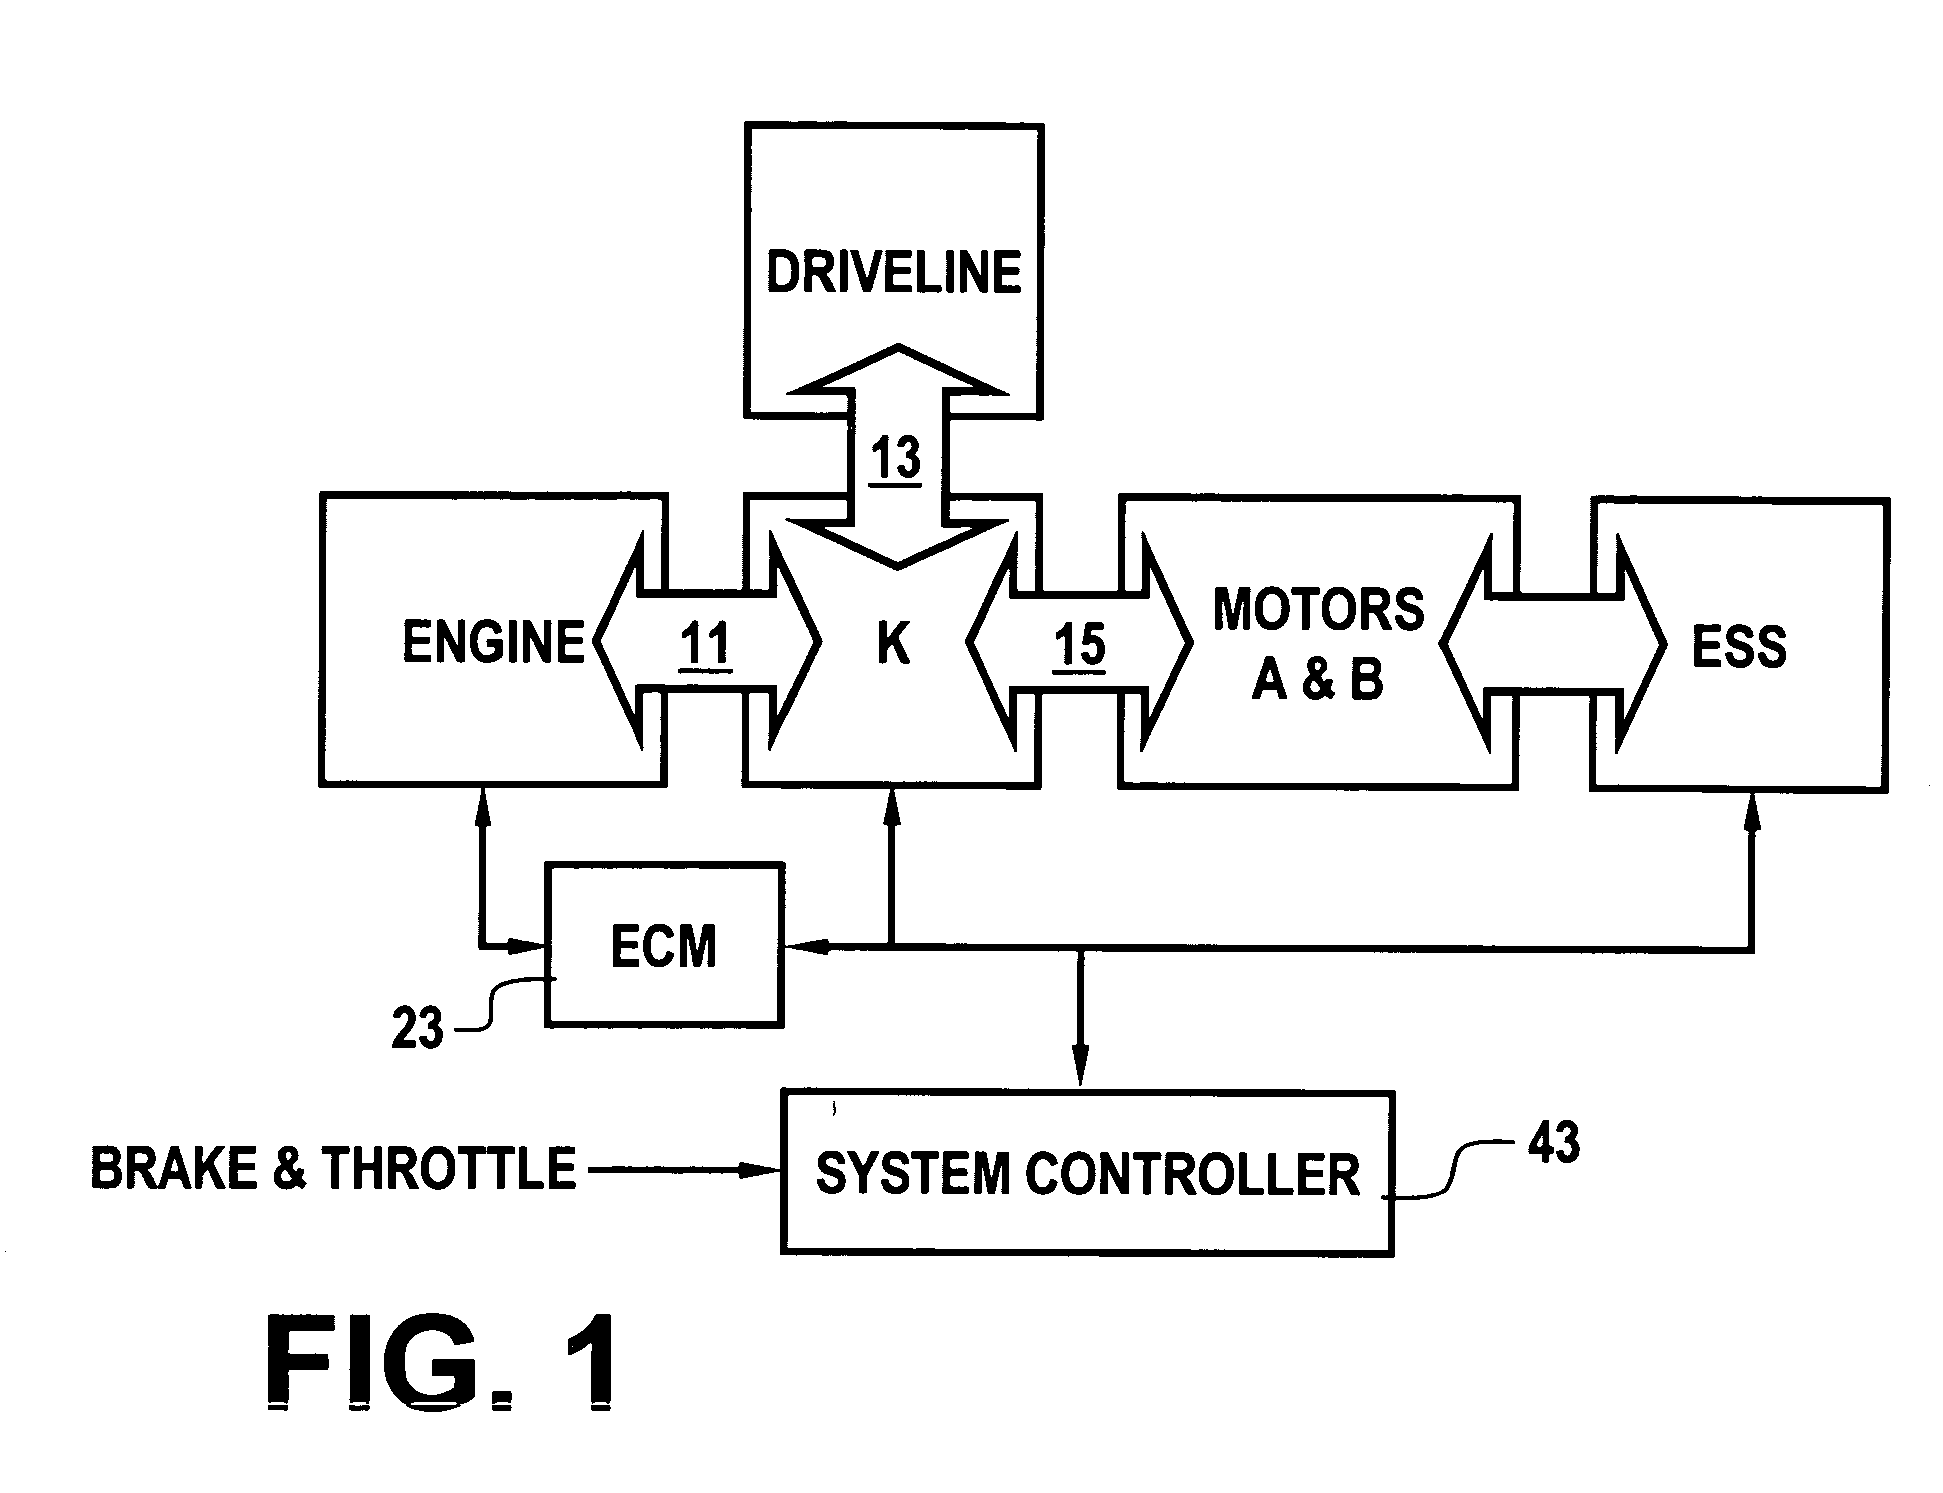 Single motor recovery for an electrically variable transmission